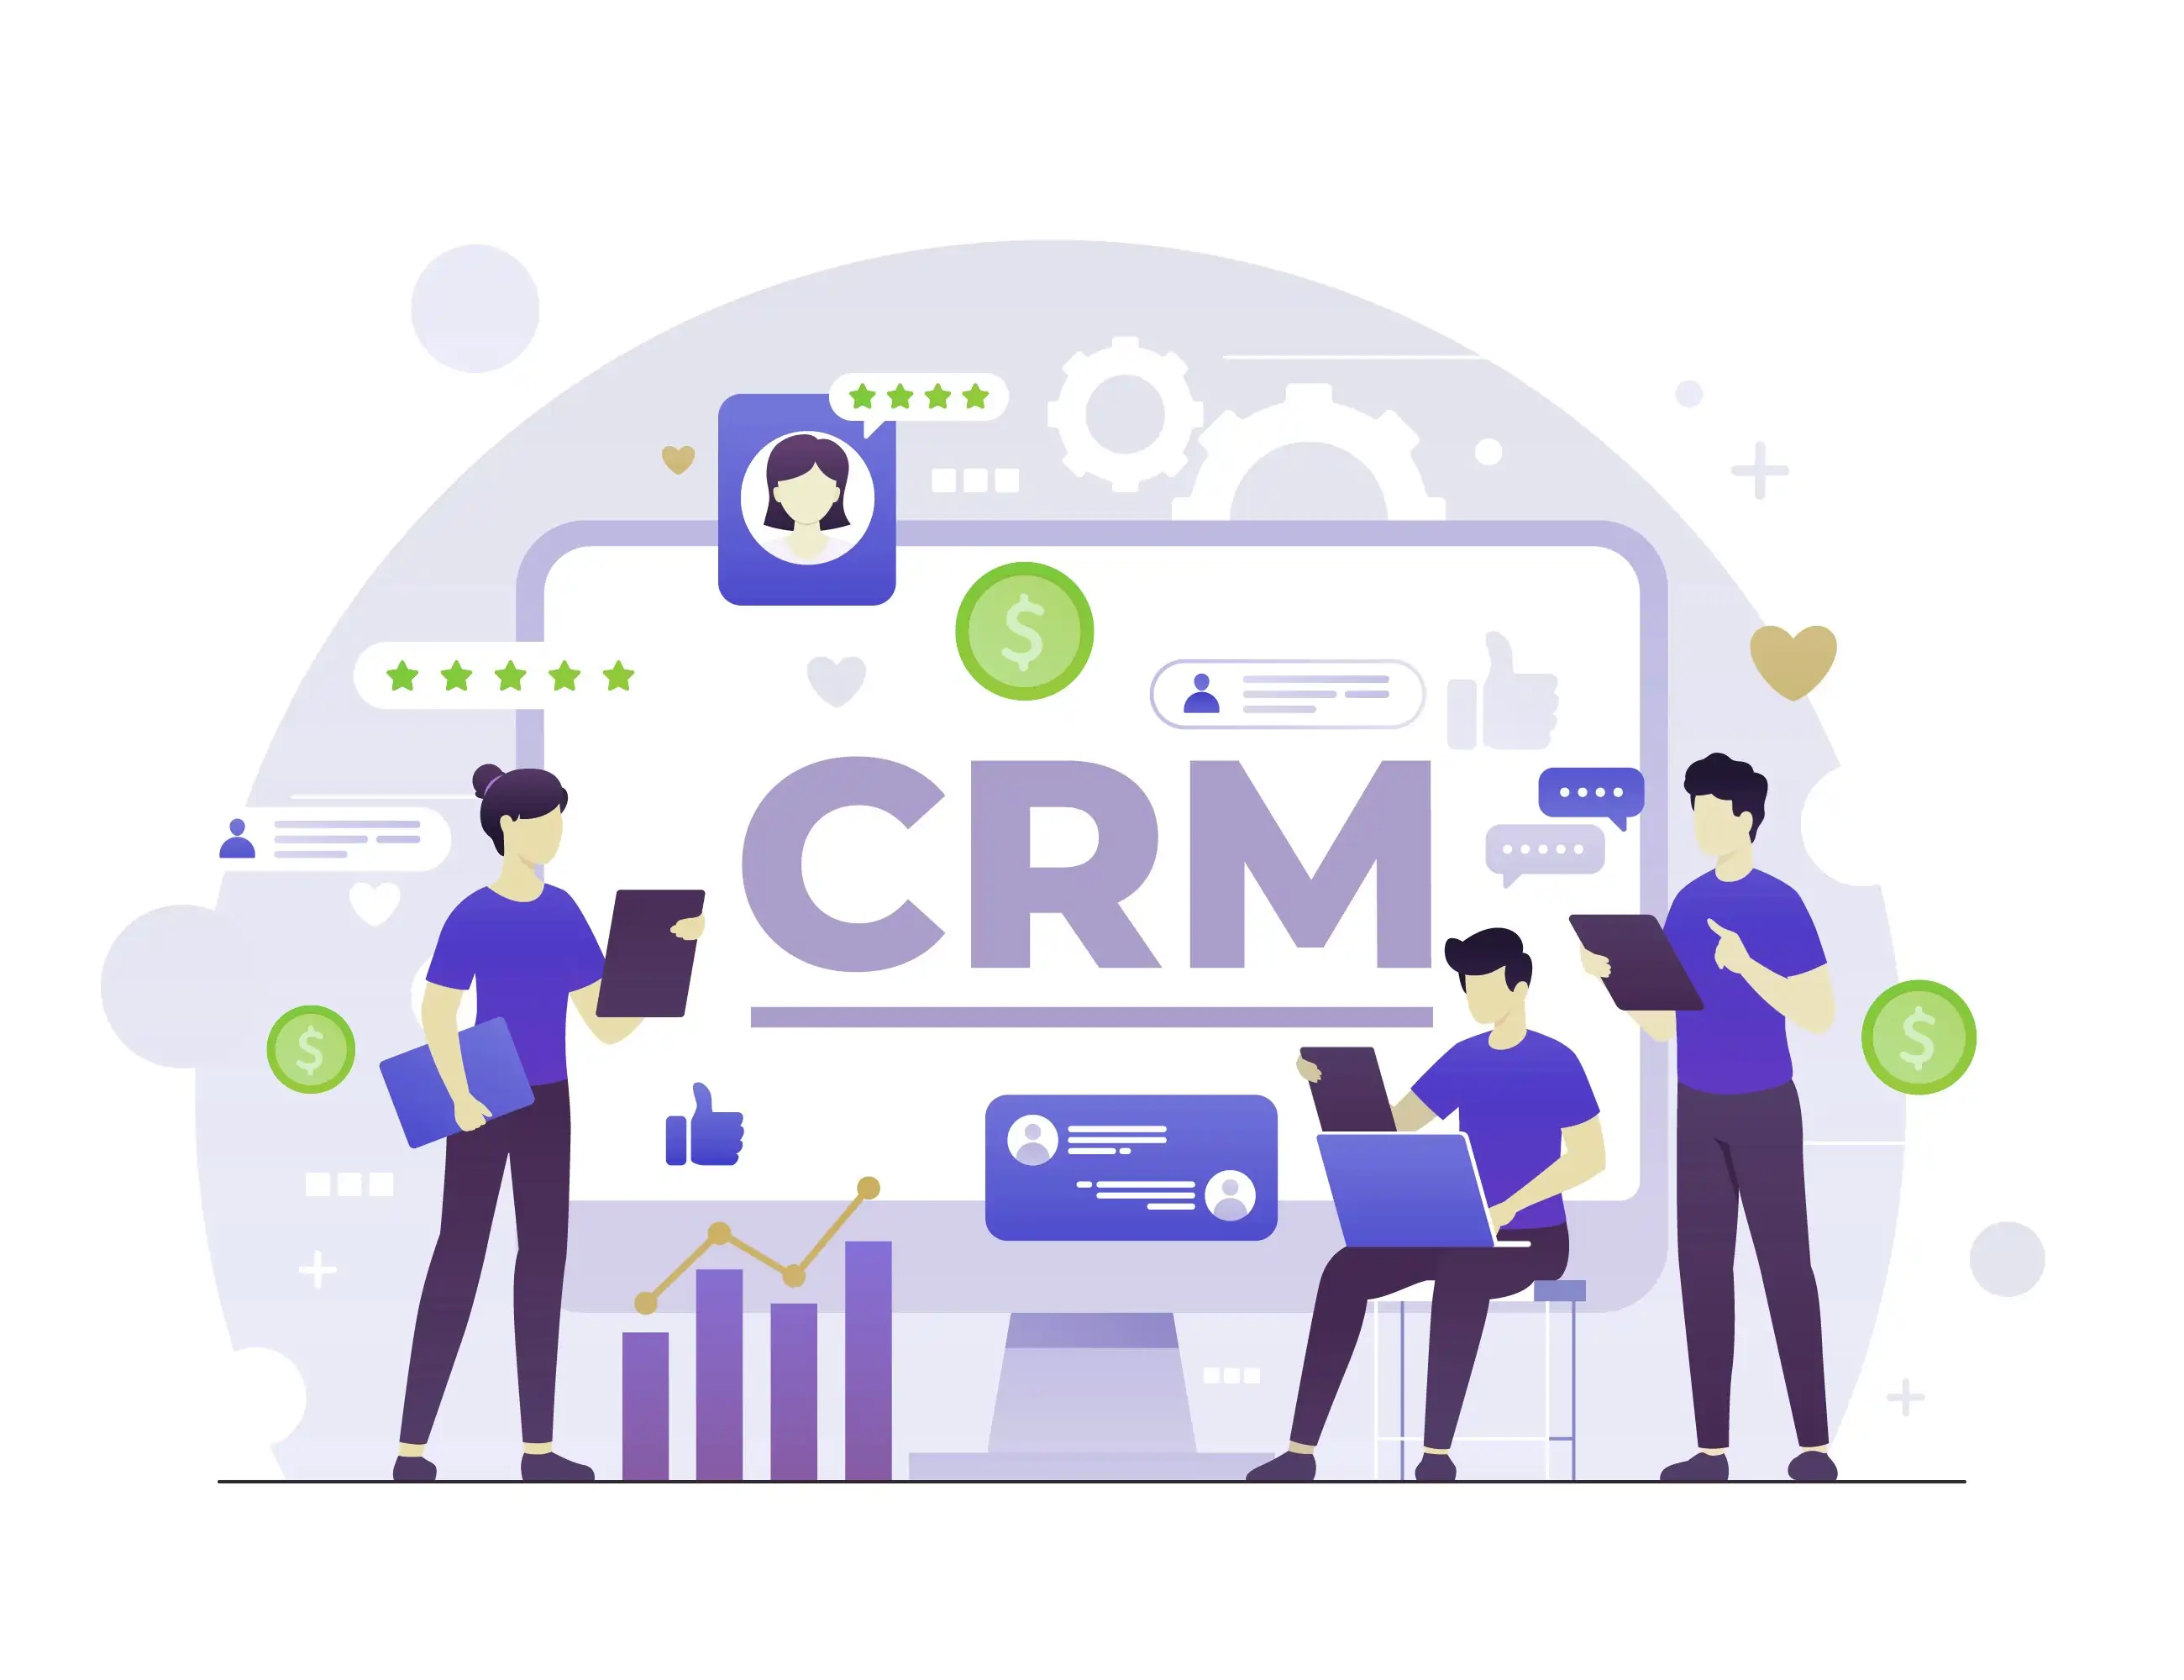 Scope of CRM: Image depicting CRM's breadth